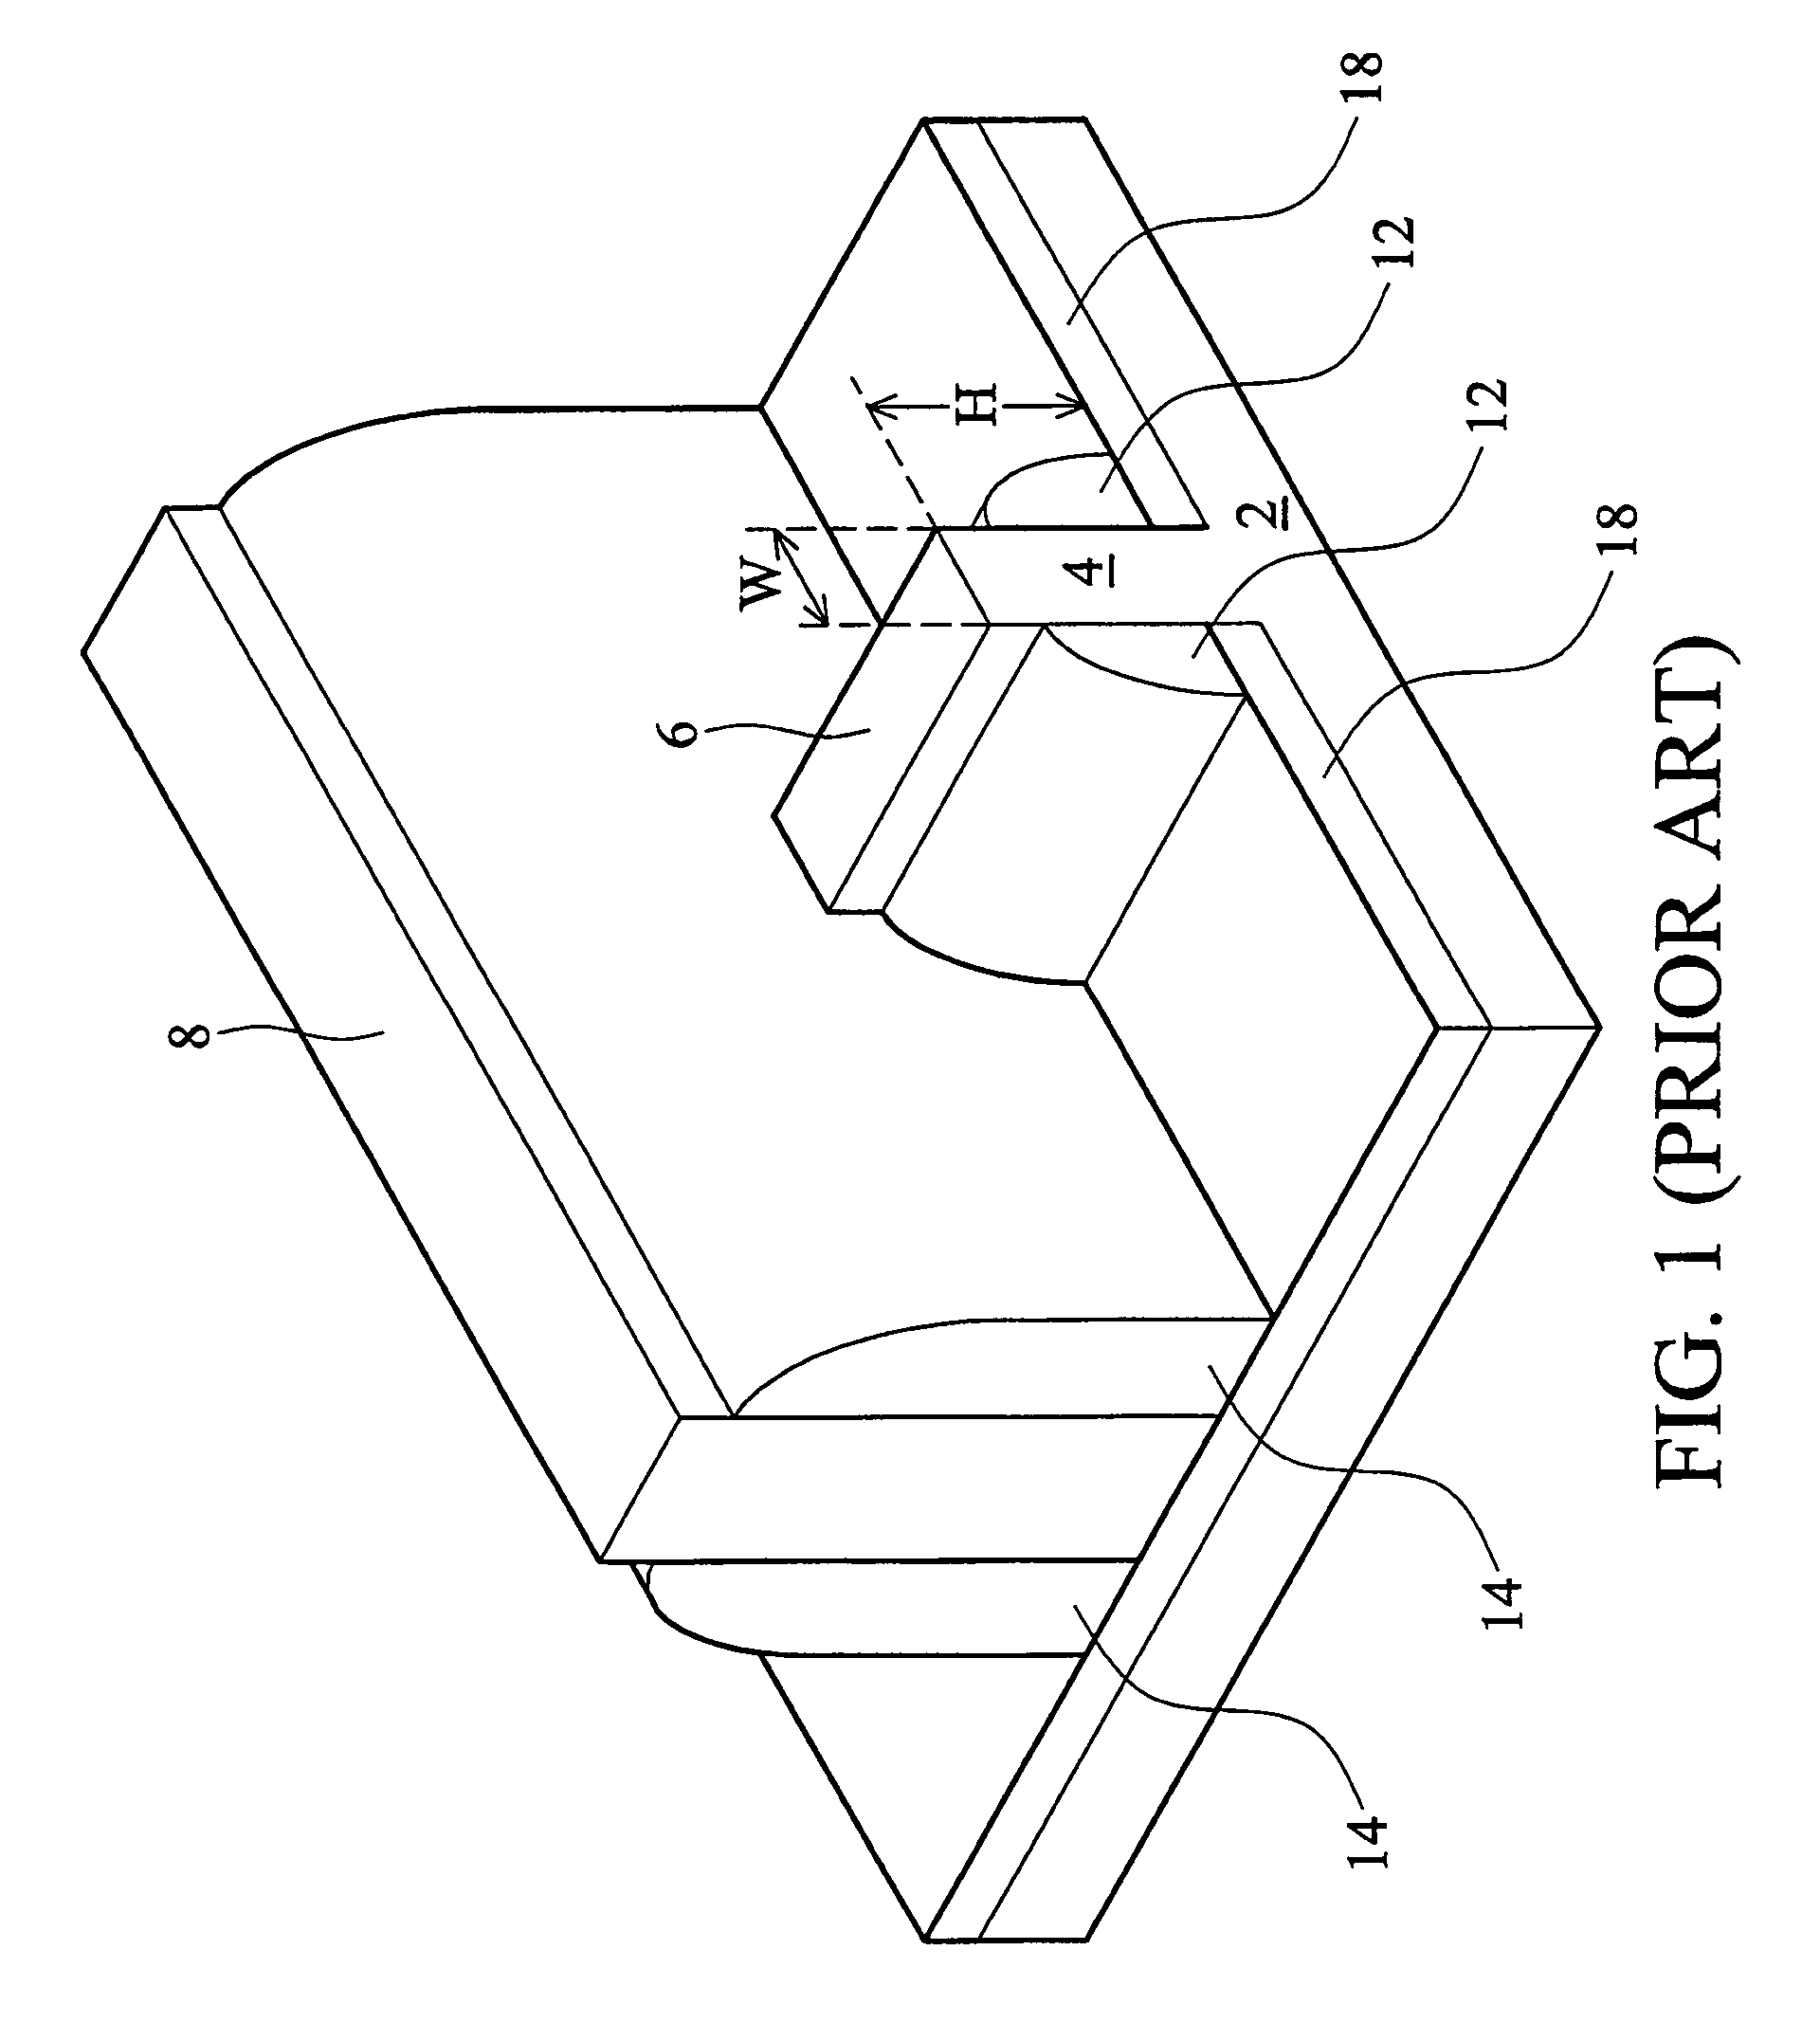 Fabrication of FinFETs with multiple fin heights